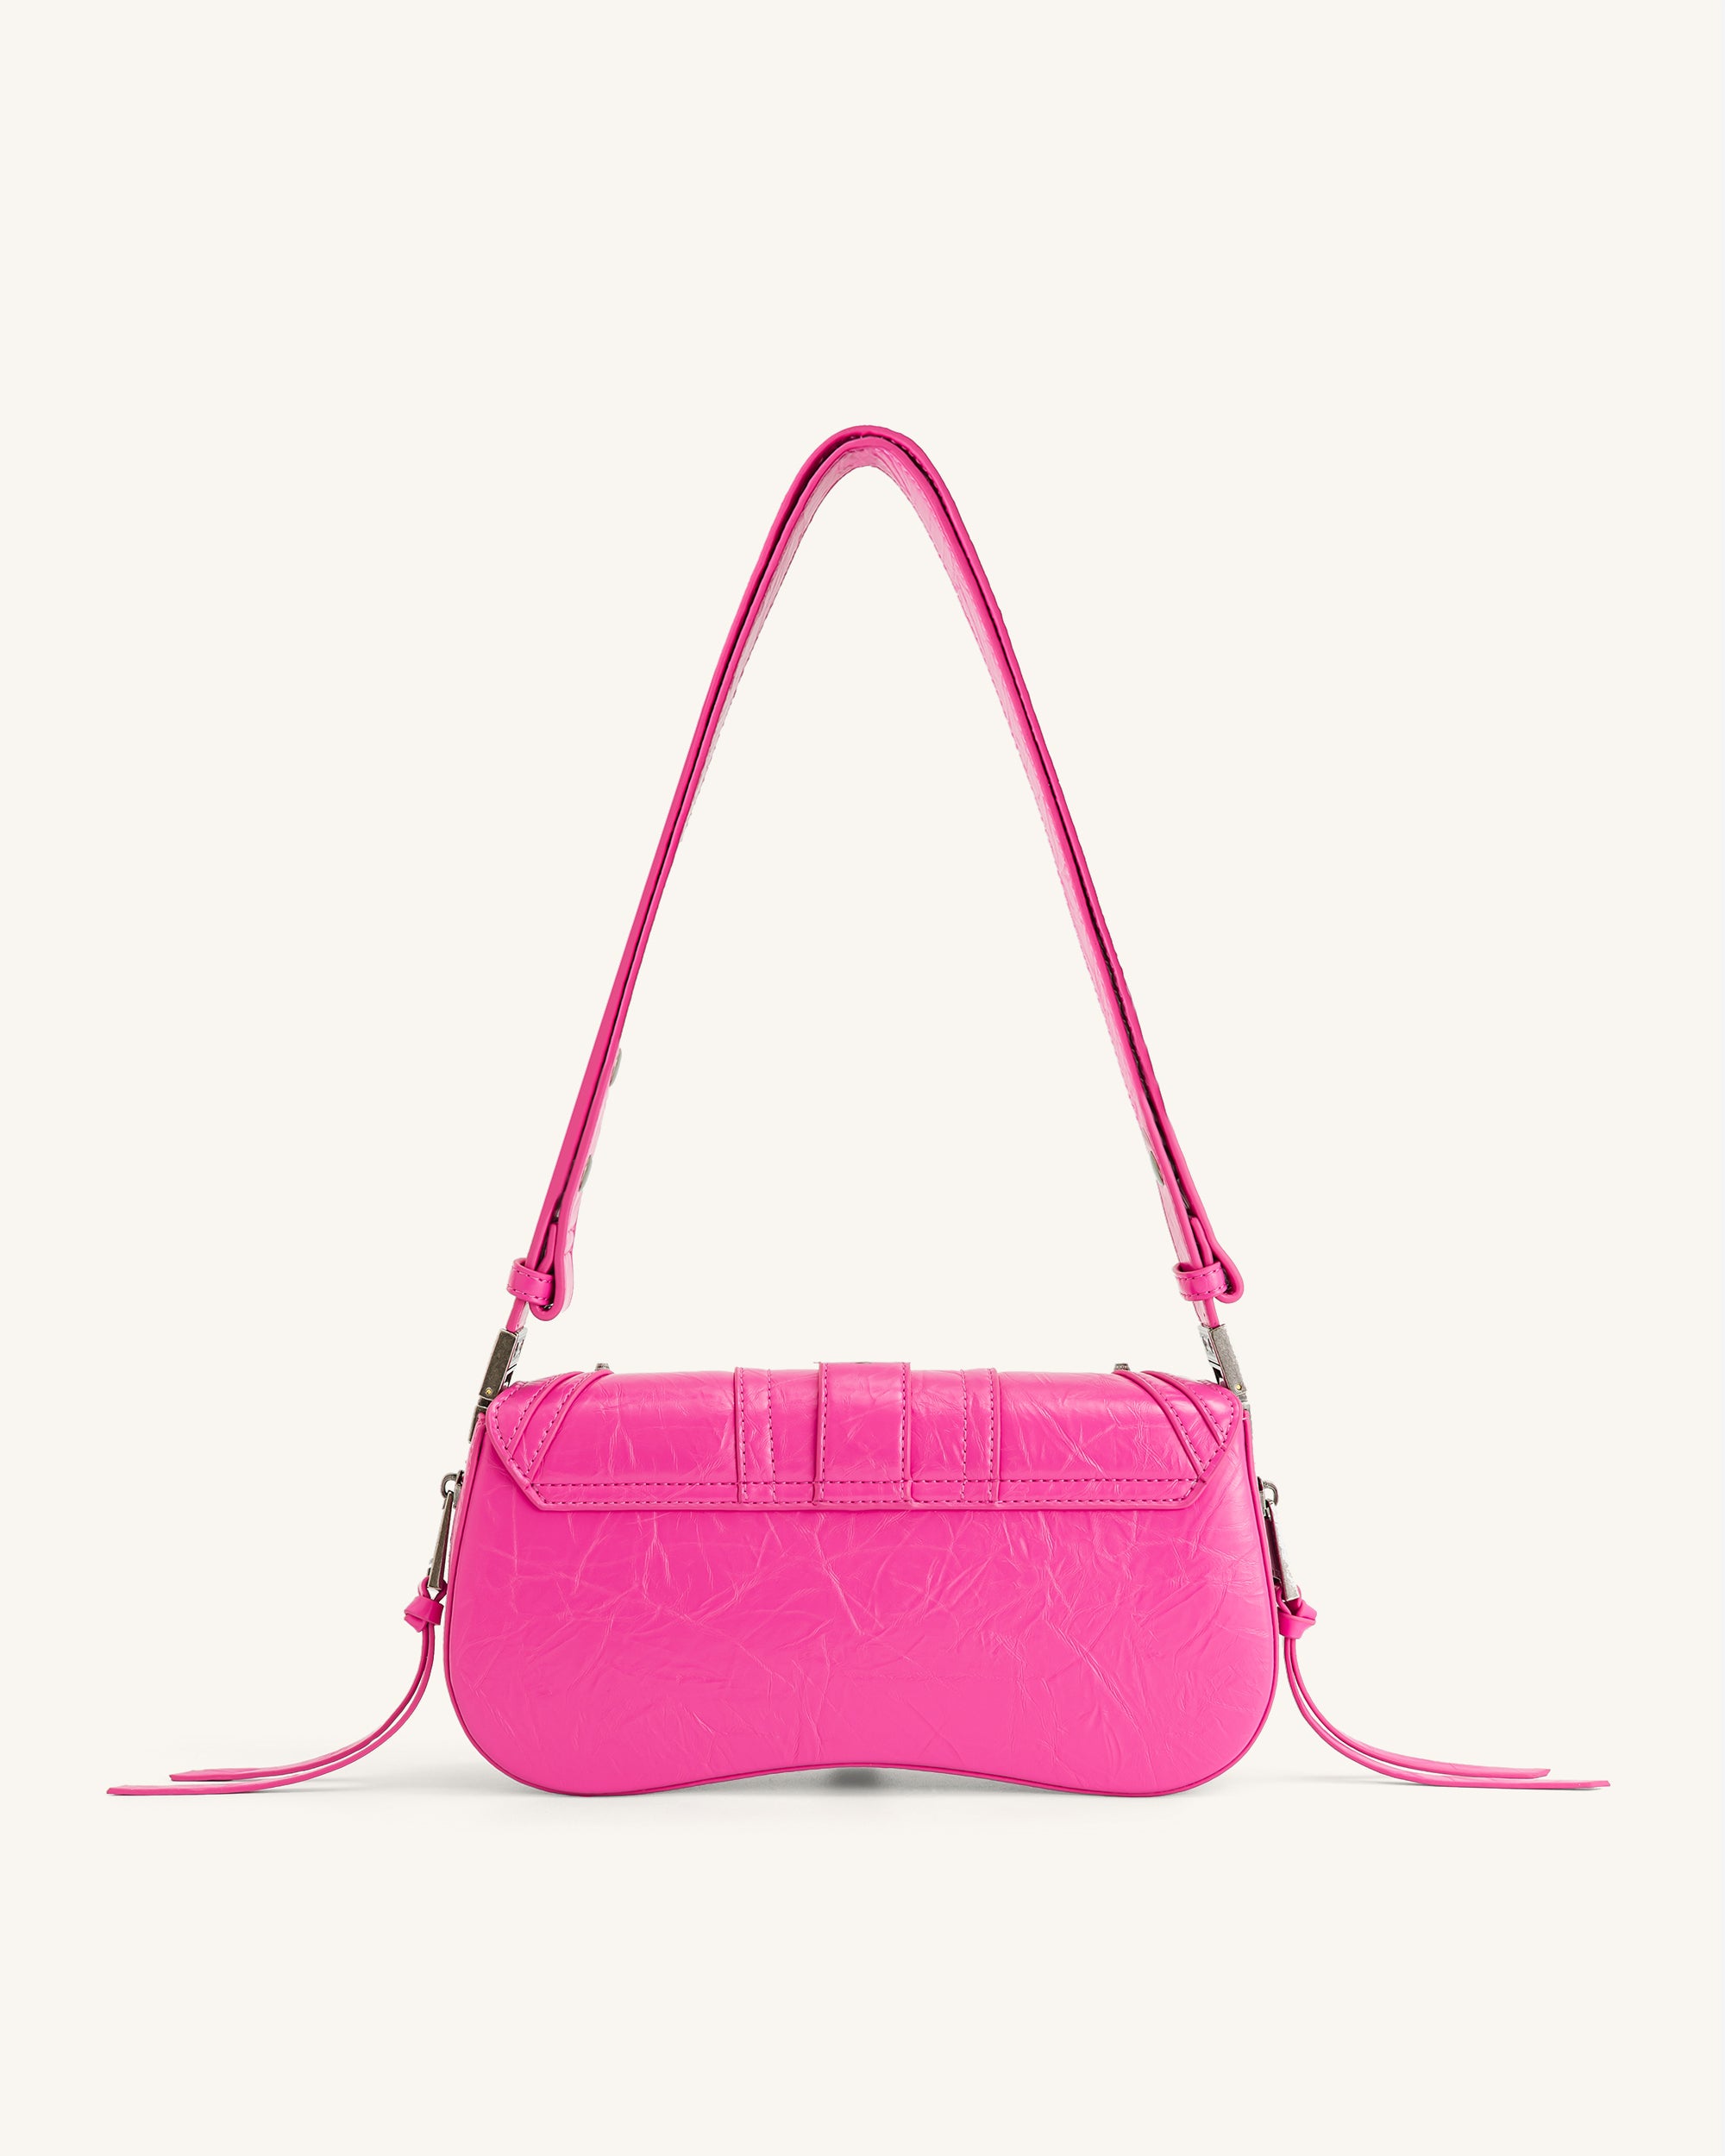 More Than Friends Bag Pink